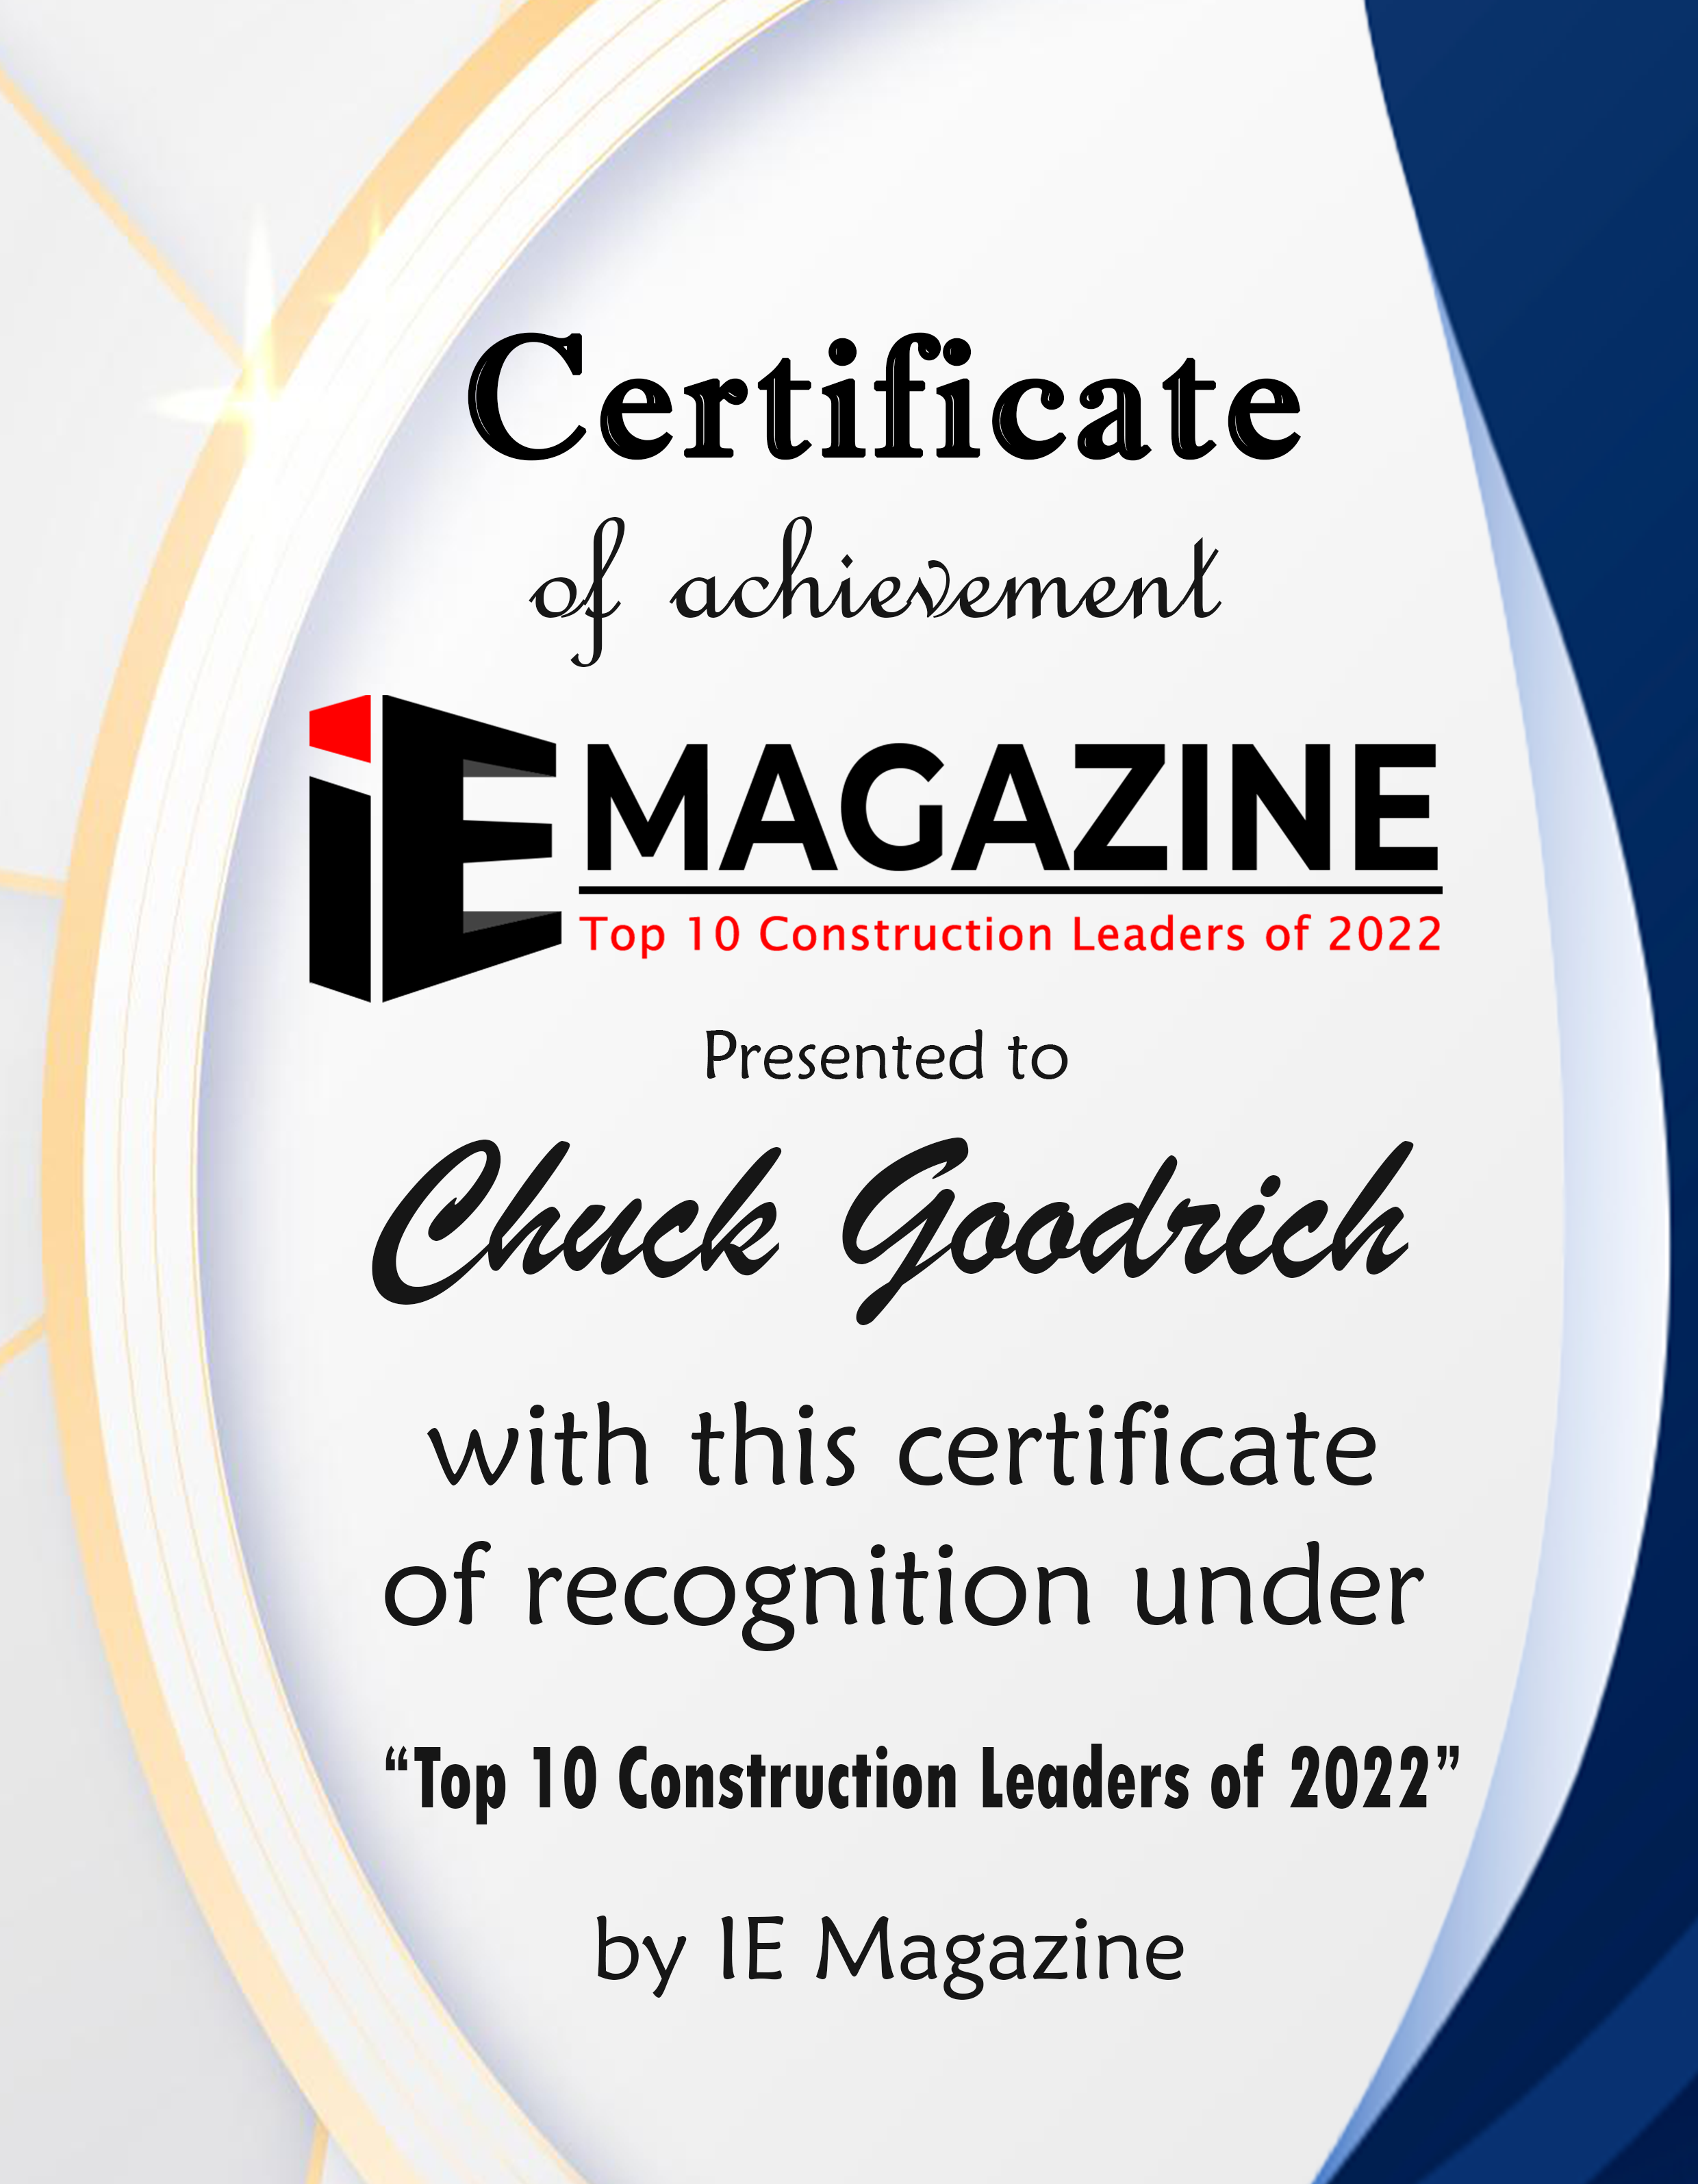 Chuck Goodrich, President & CEO of Gaylor Electric, Inc. Certificate